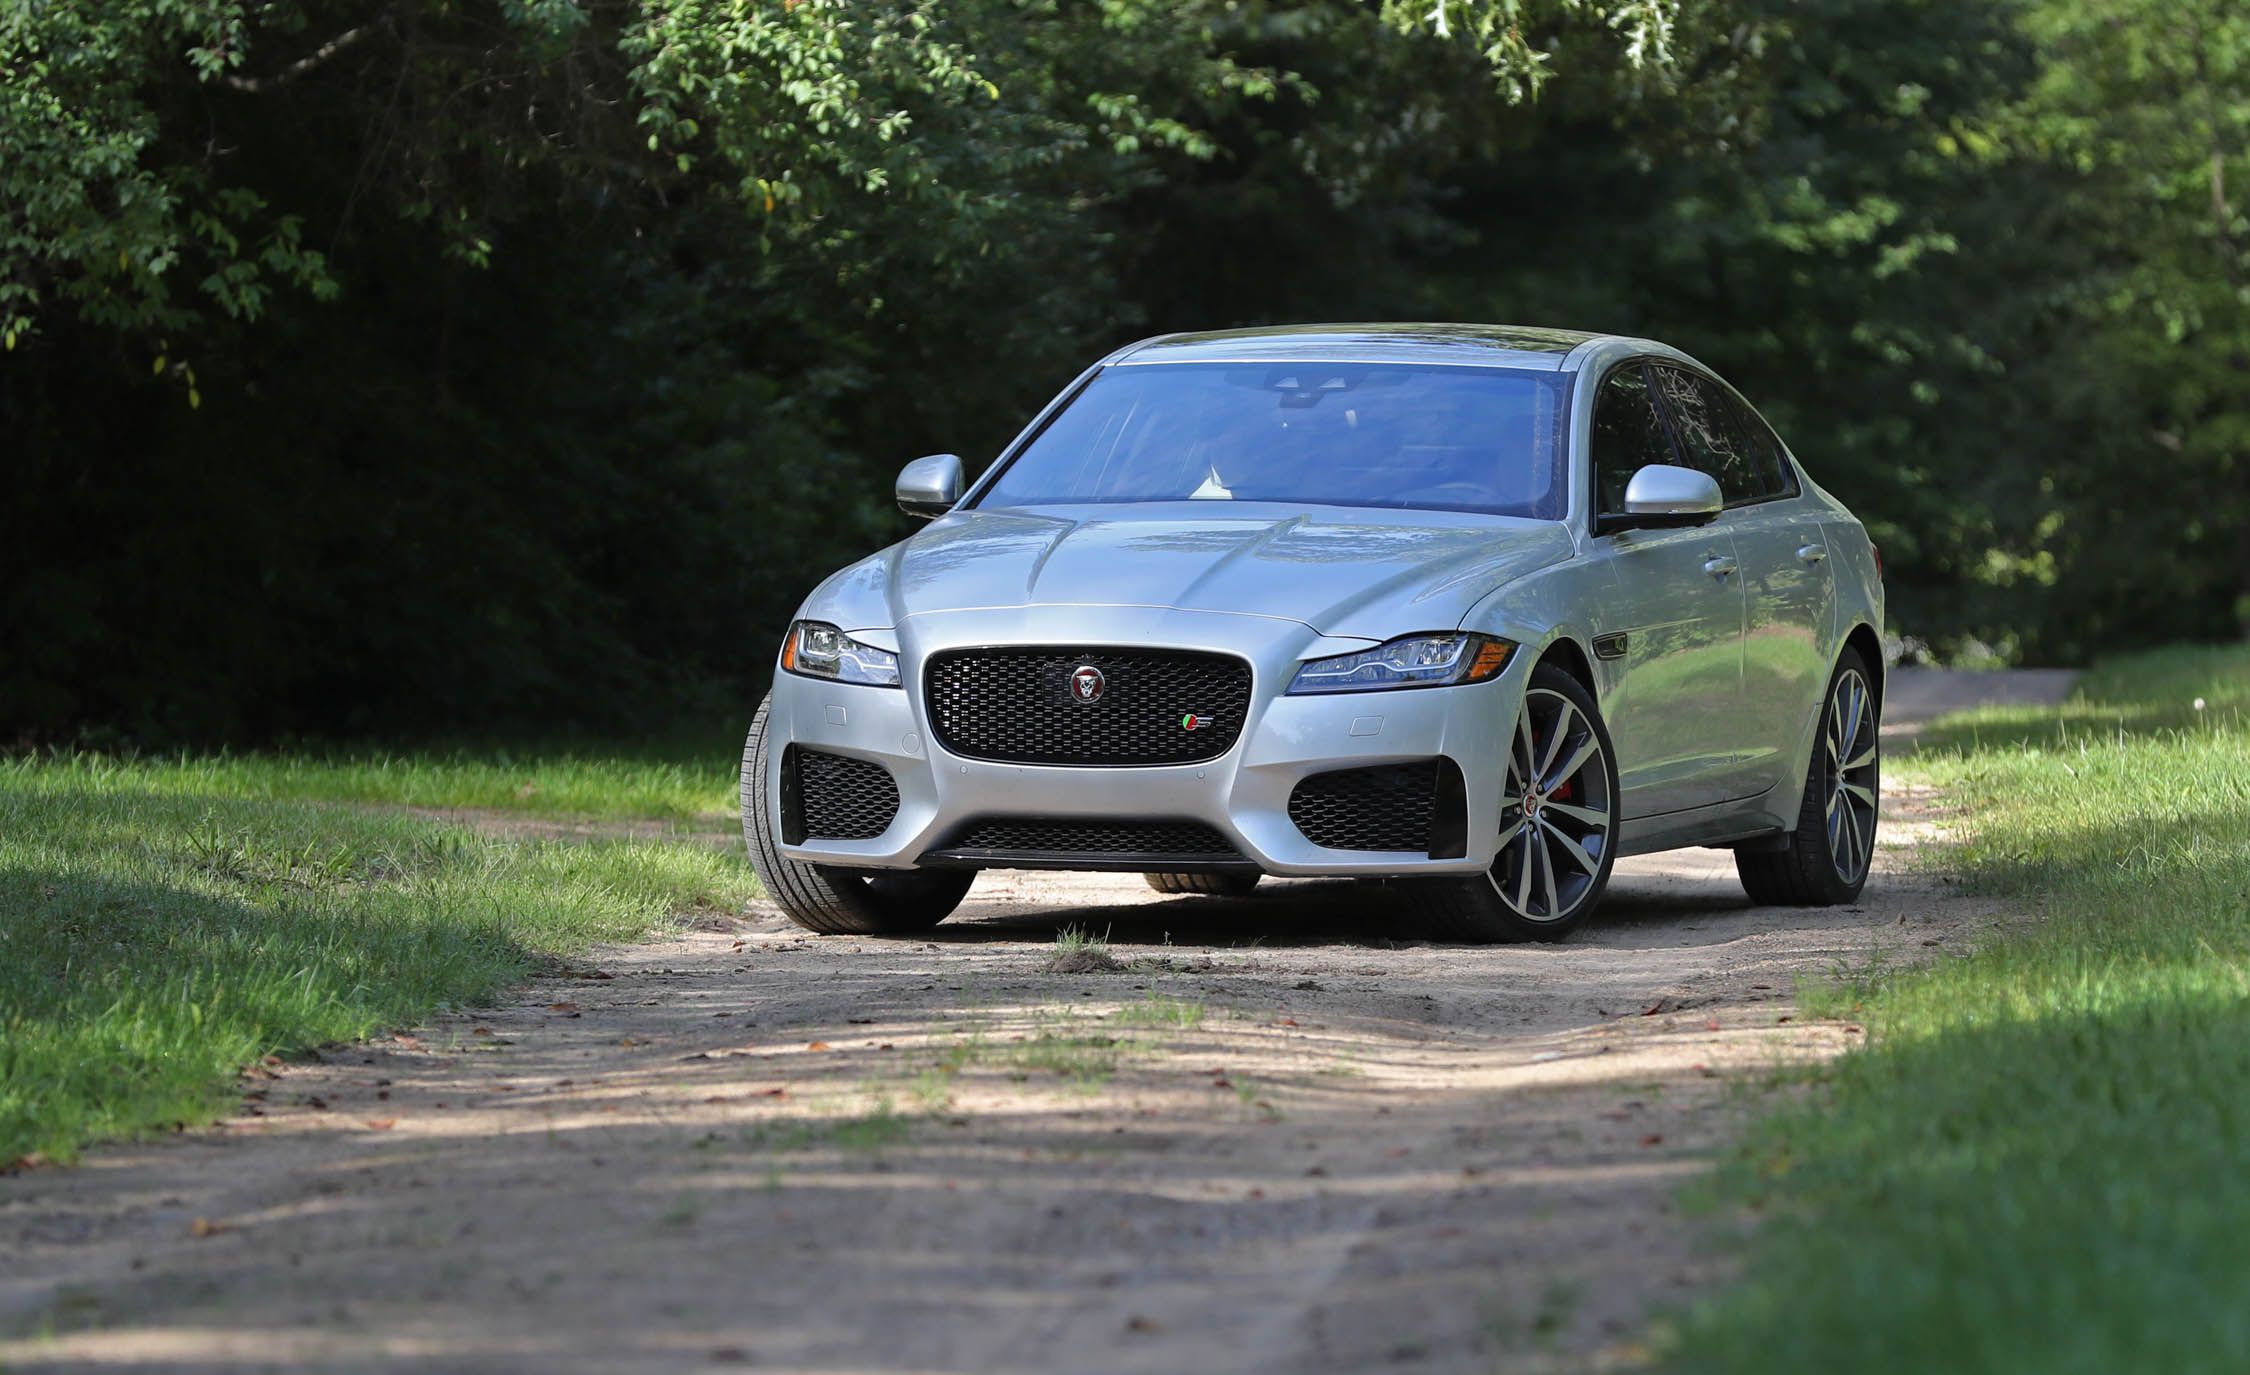 2021 Jaguar XF Prices Slashed as XE Discontinued